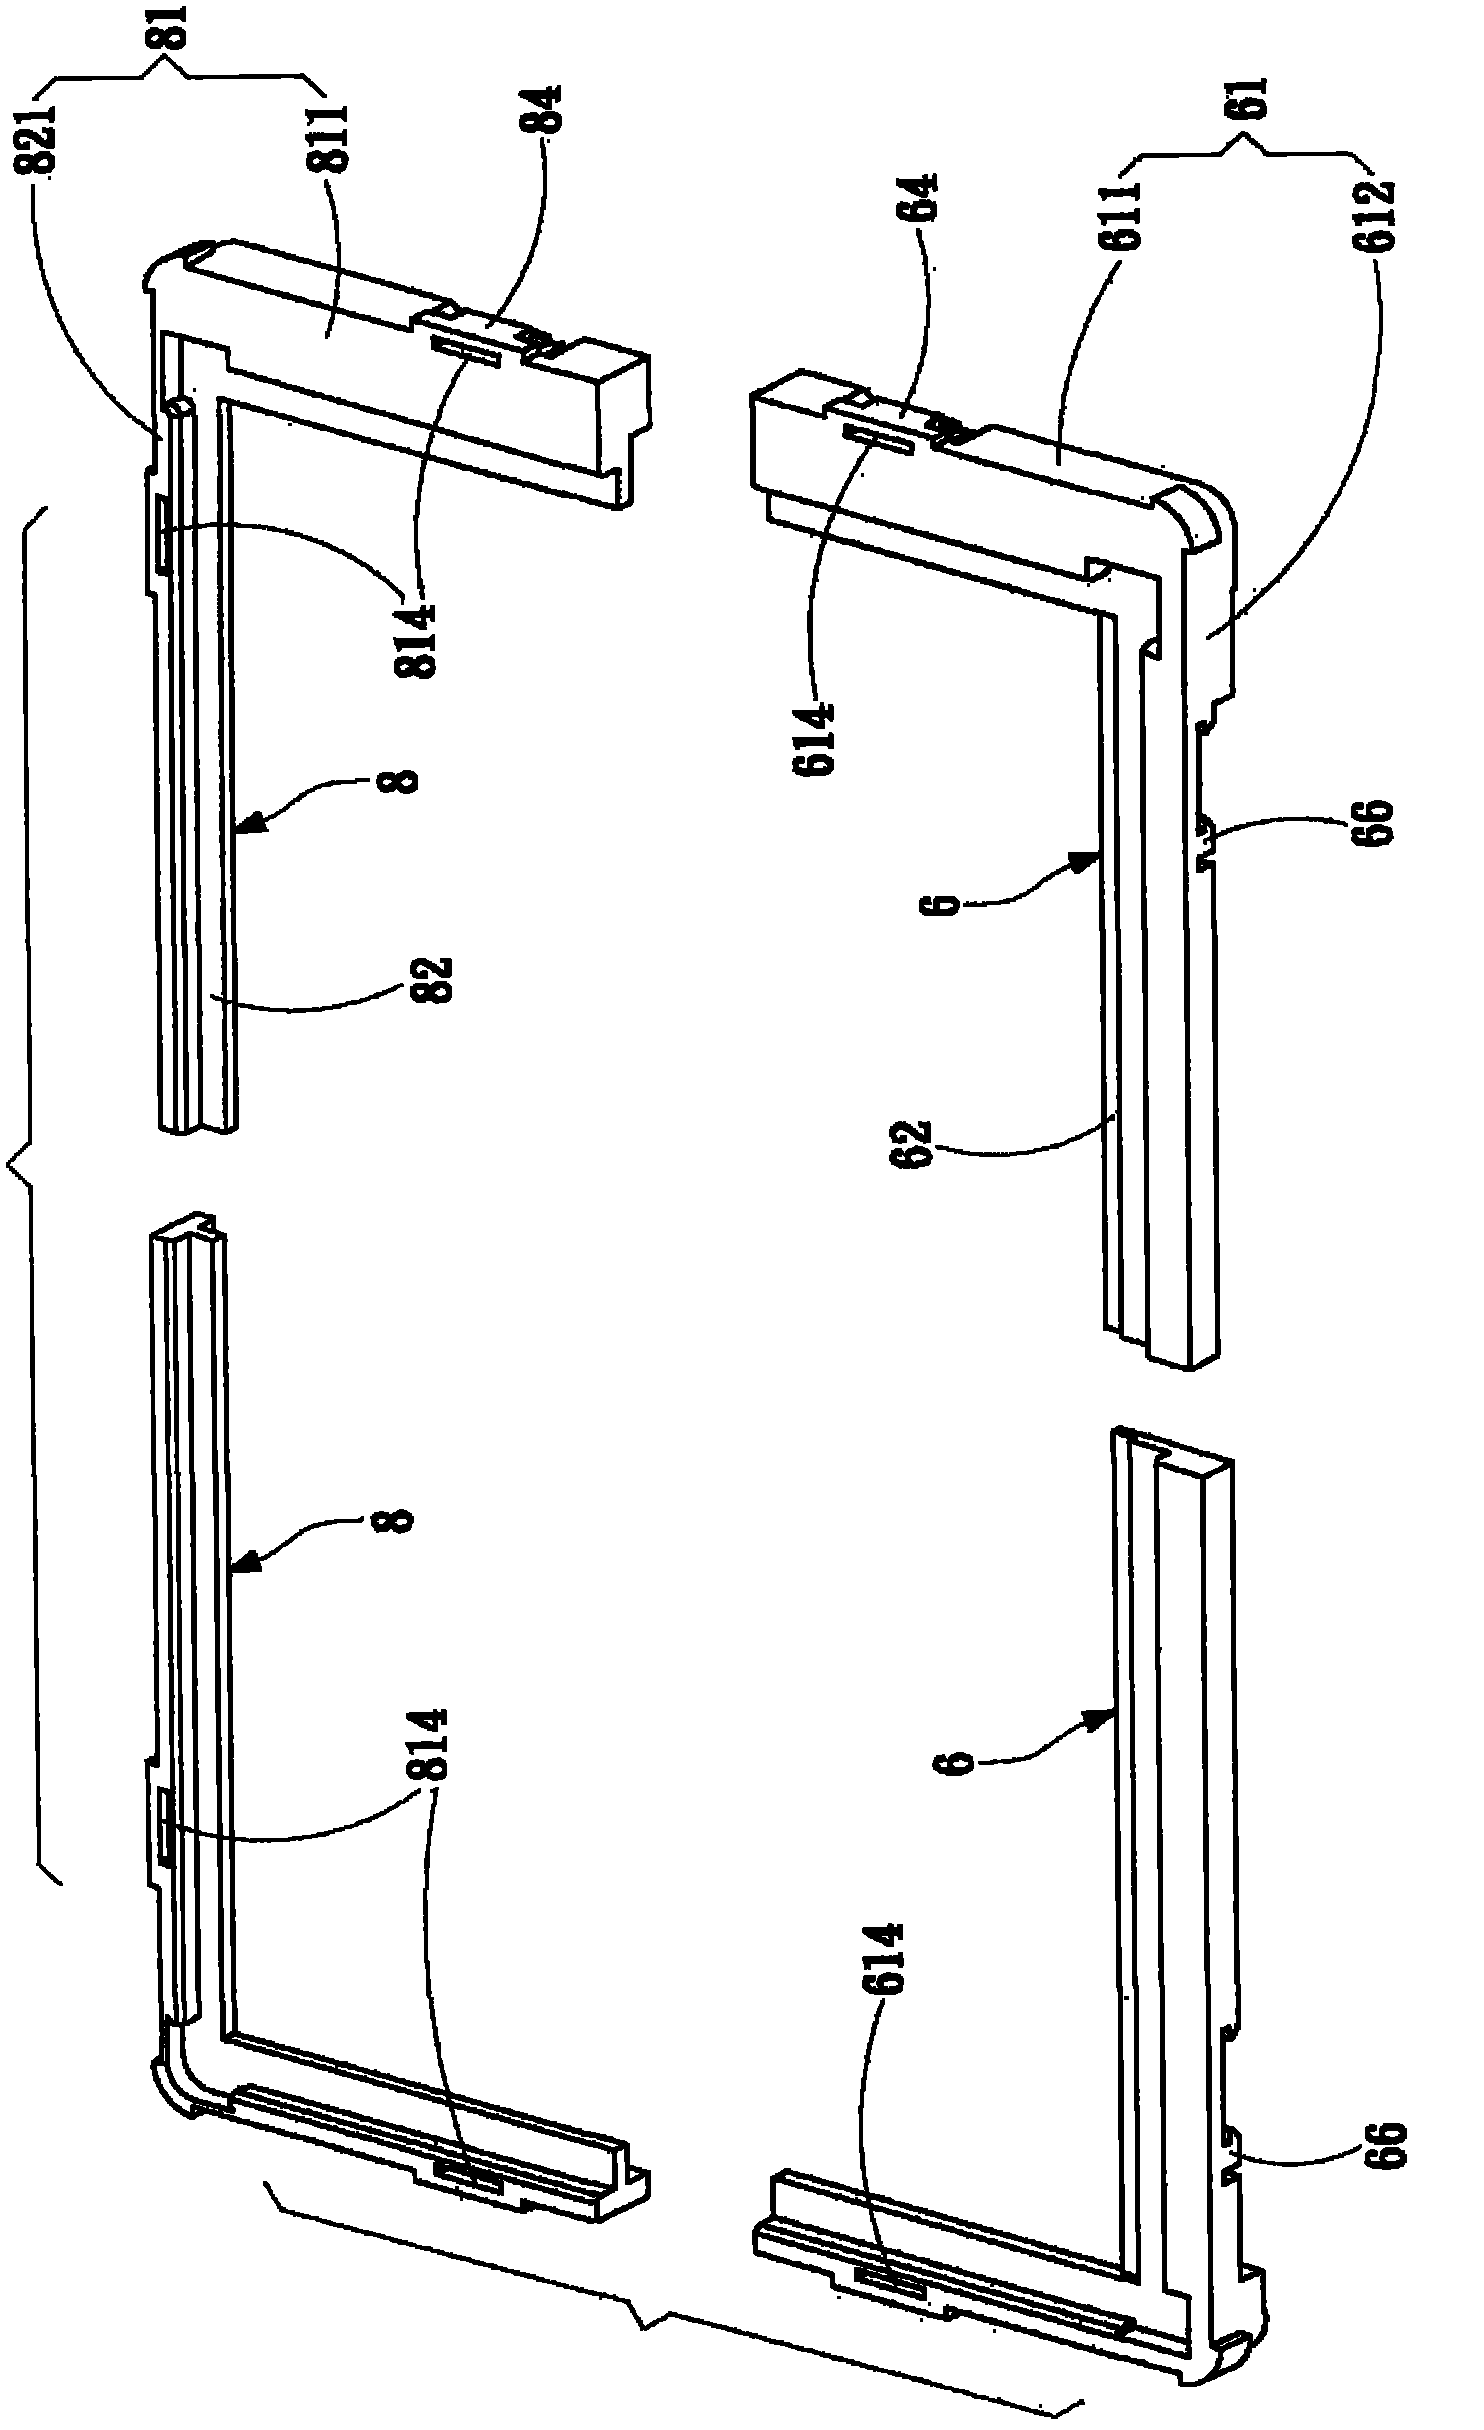 Backlight module and rubber frame structure thereof